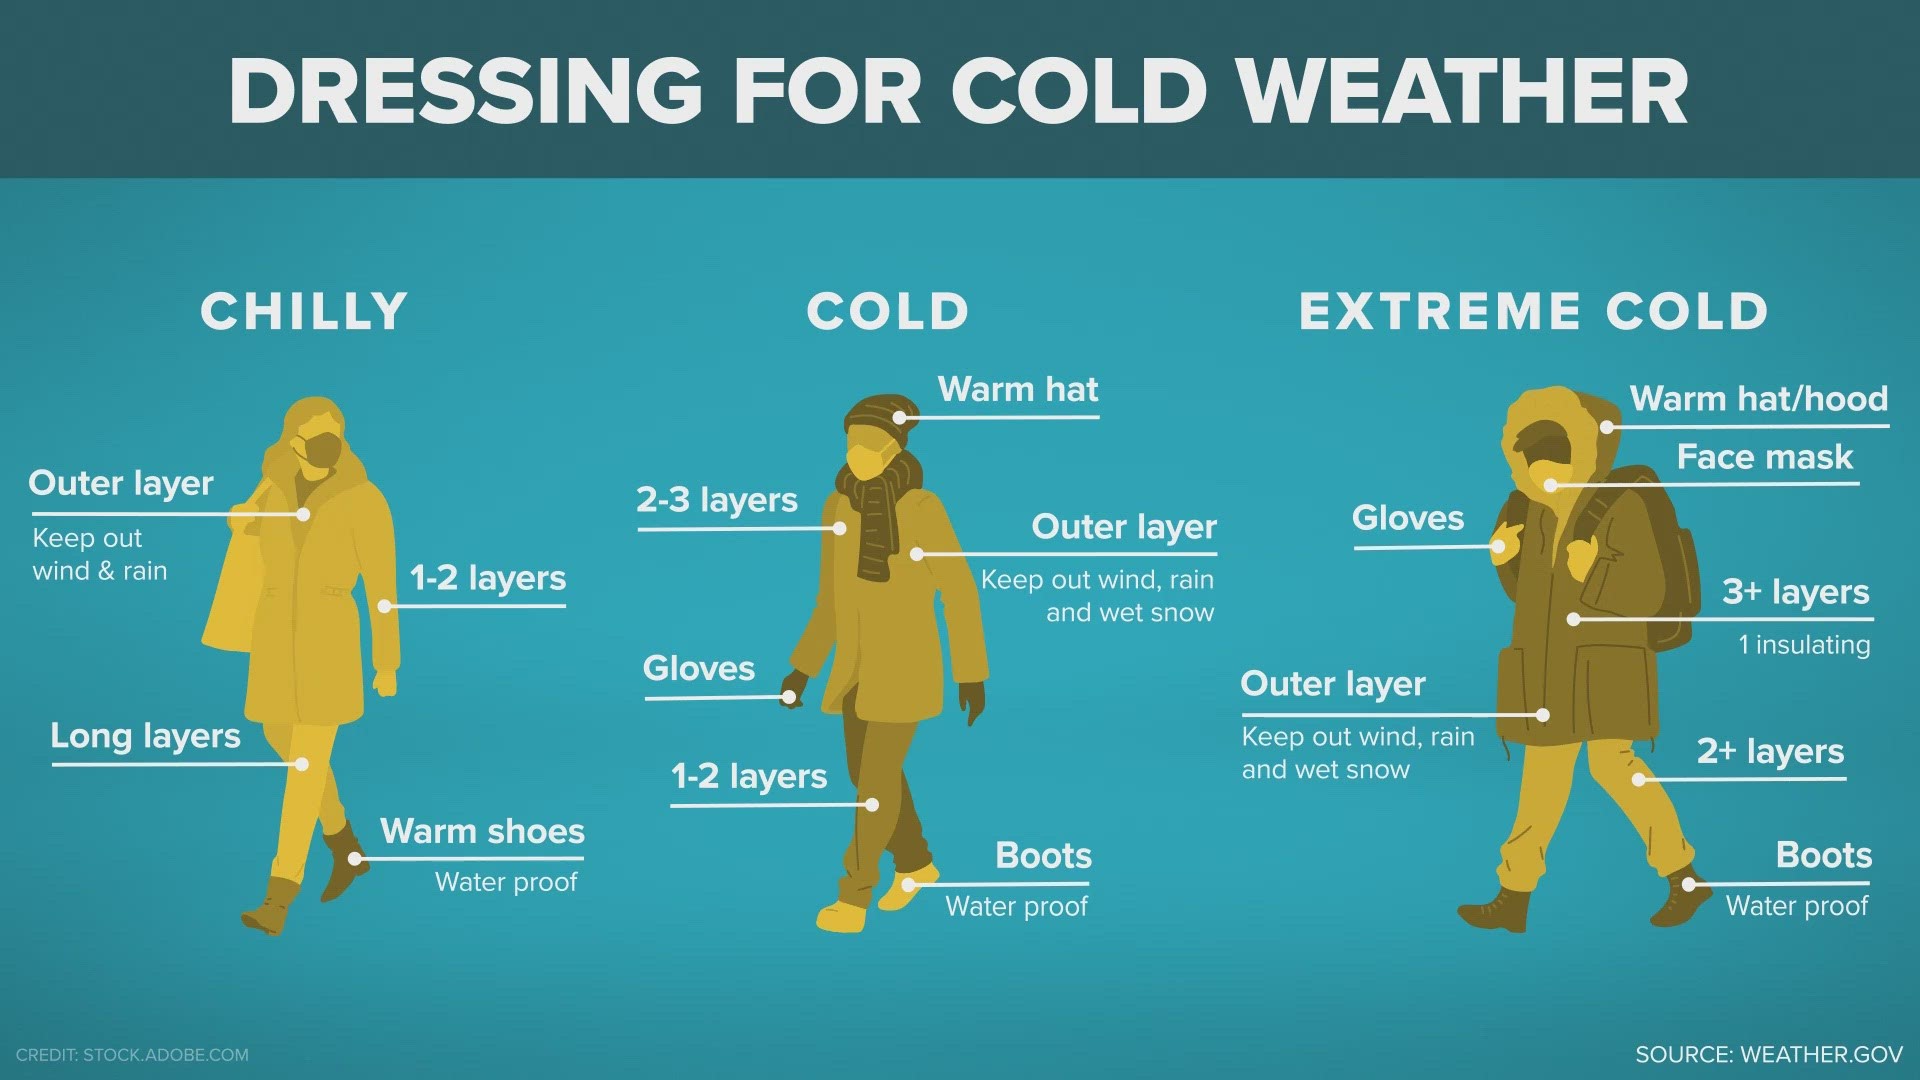 How to Dress for Extremely Cold Weather